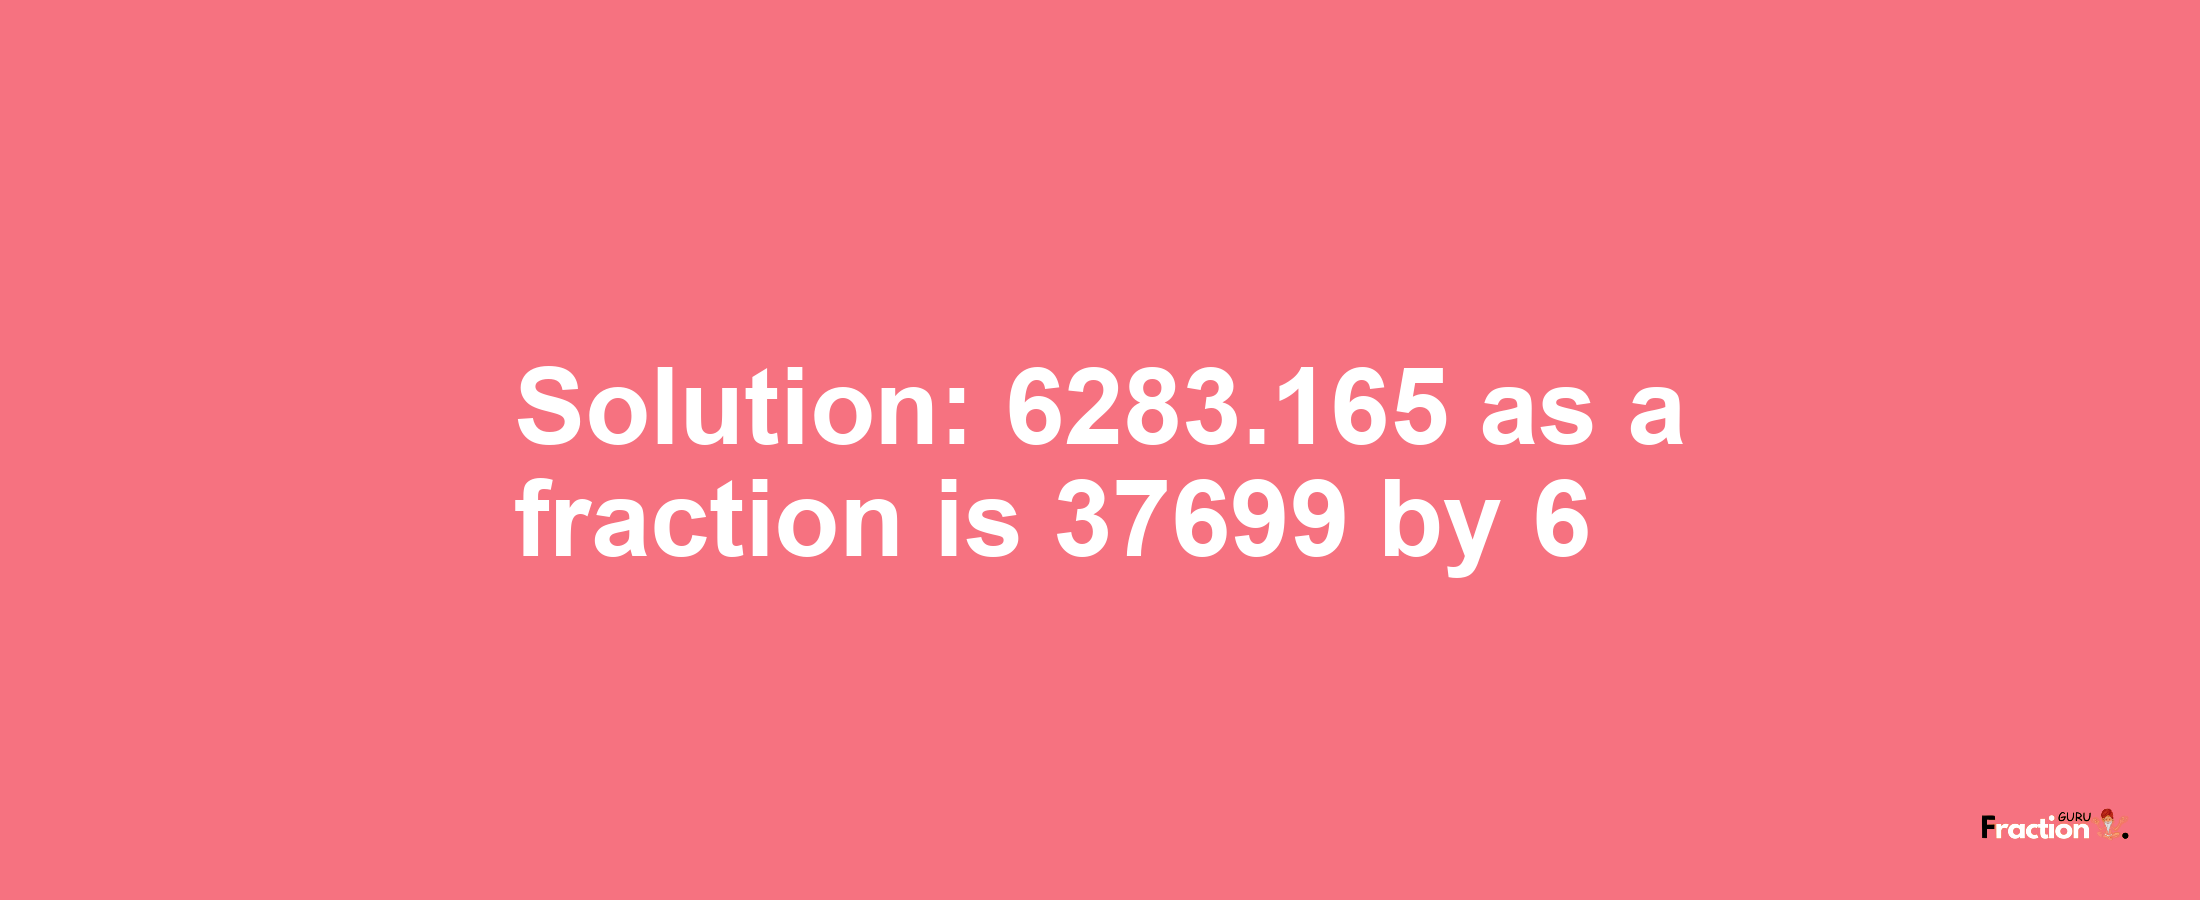 Solution:6283.165 as a fraction is 37699/6